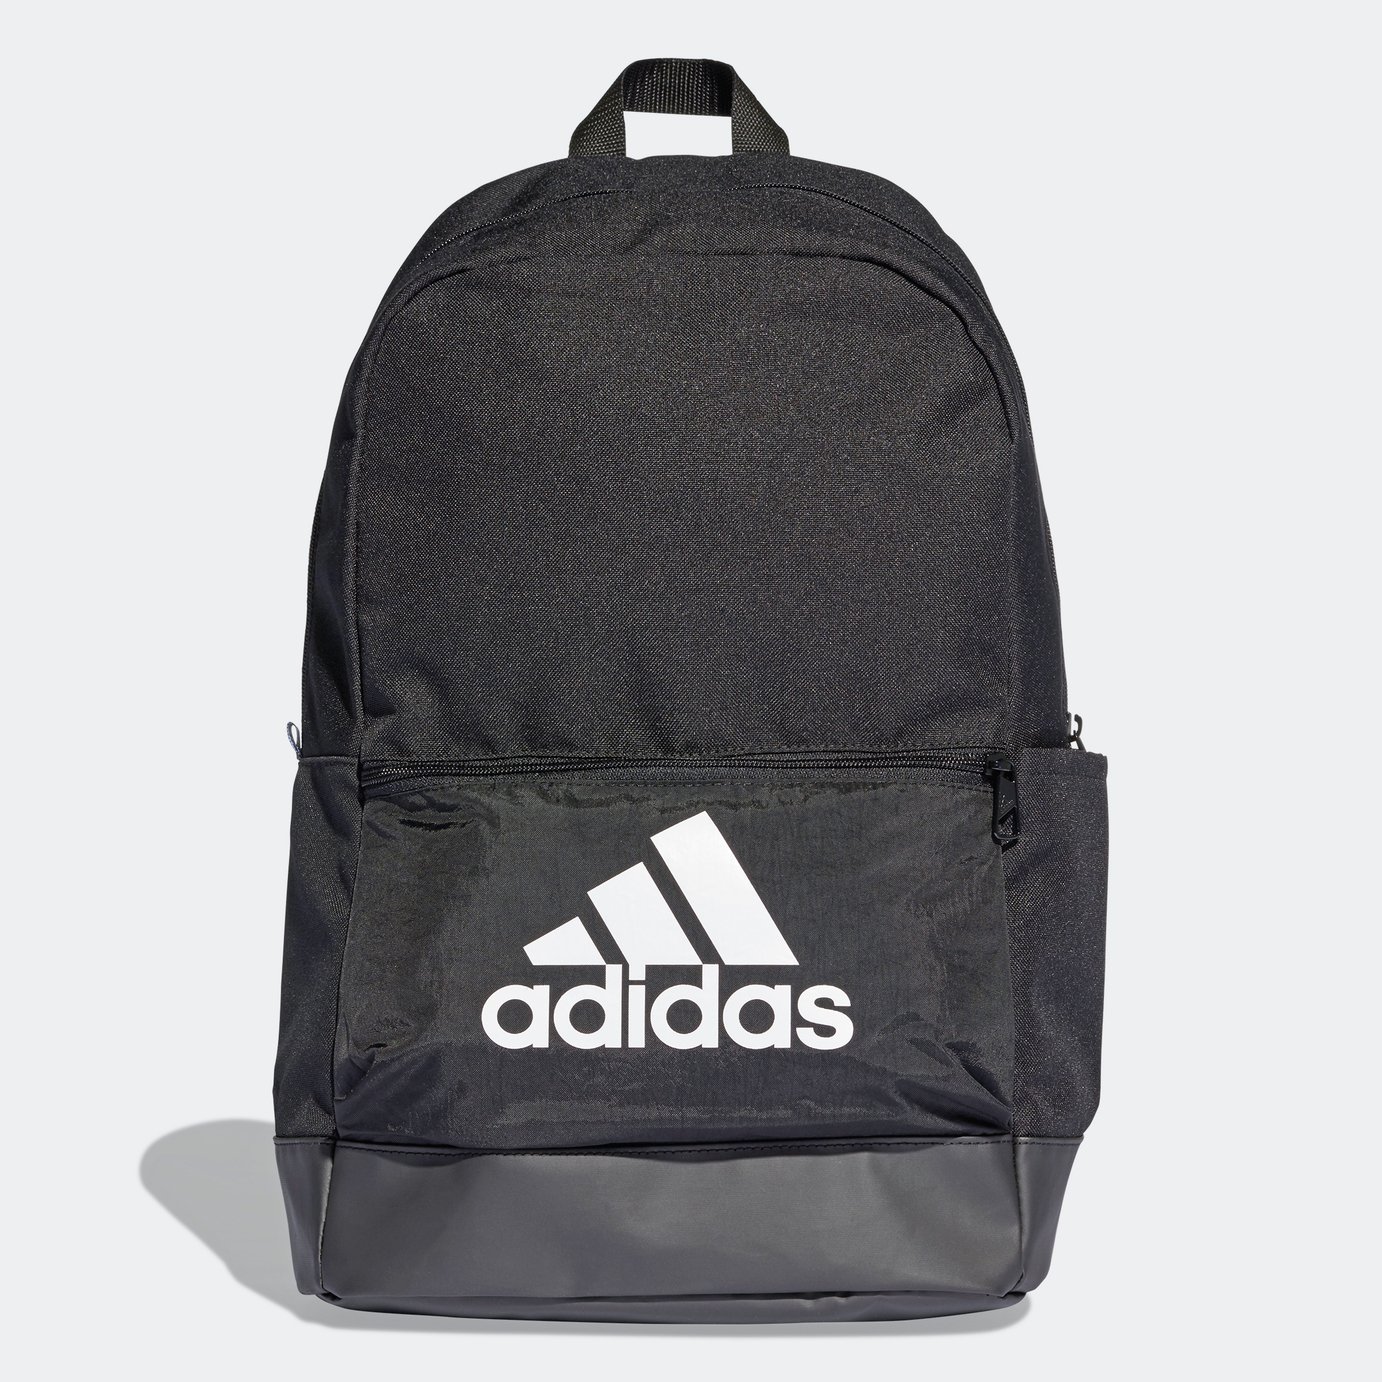 Adidas Classic Badge 24L Backpack - Black and White (9215322) | Argos ...